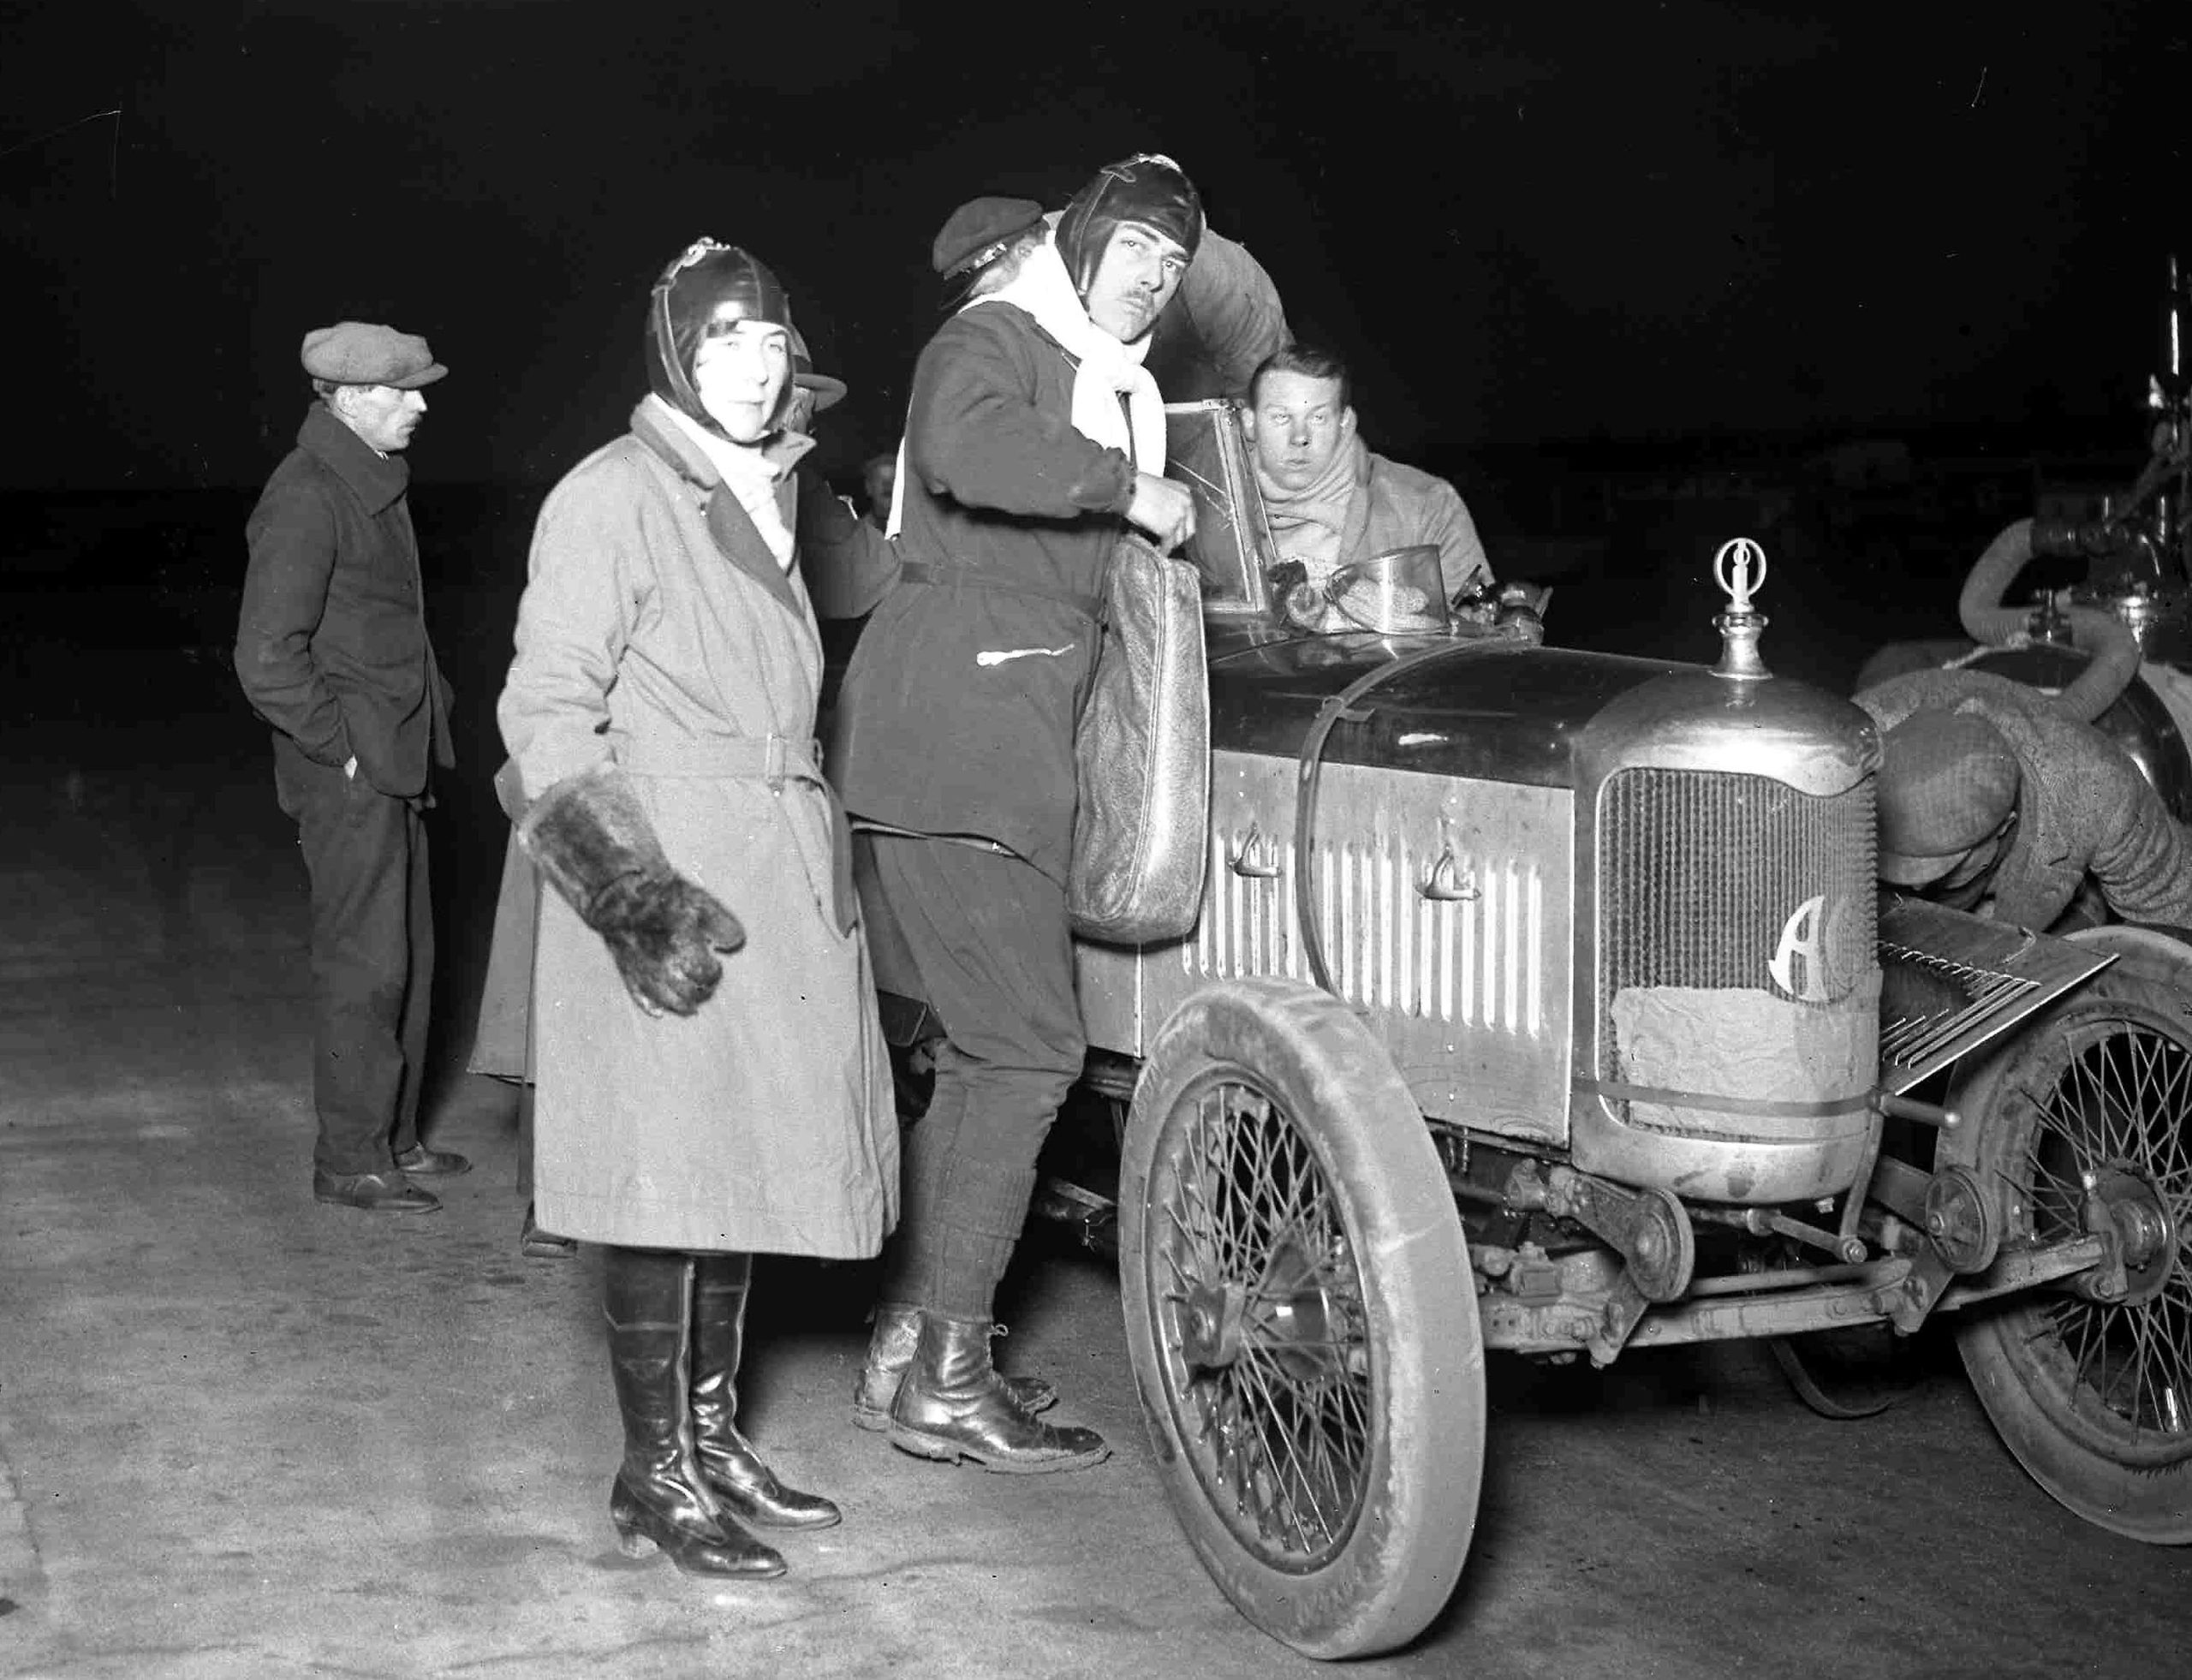 The Women’s Champion Of The 1927 Monte Carlo Rally Was The Endurance Driving Champion Of The World